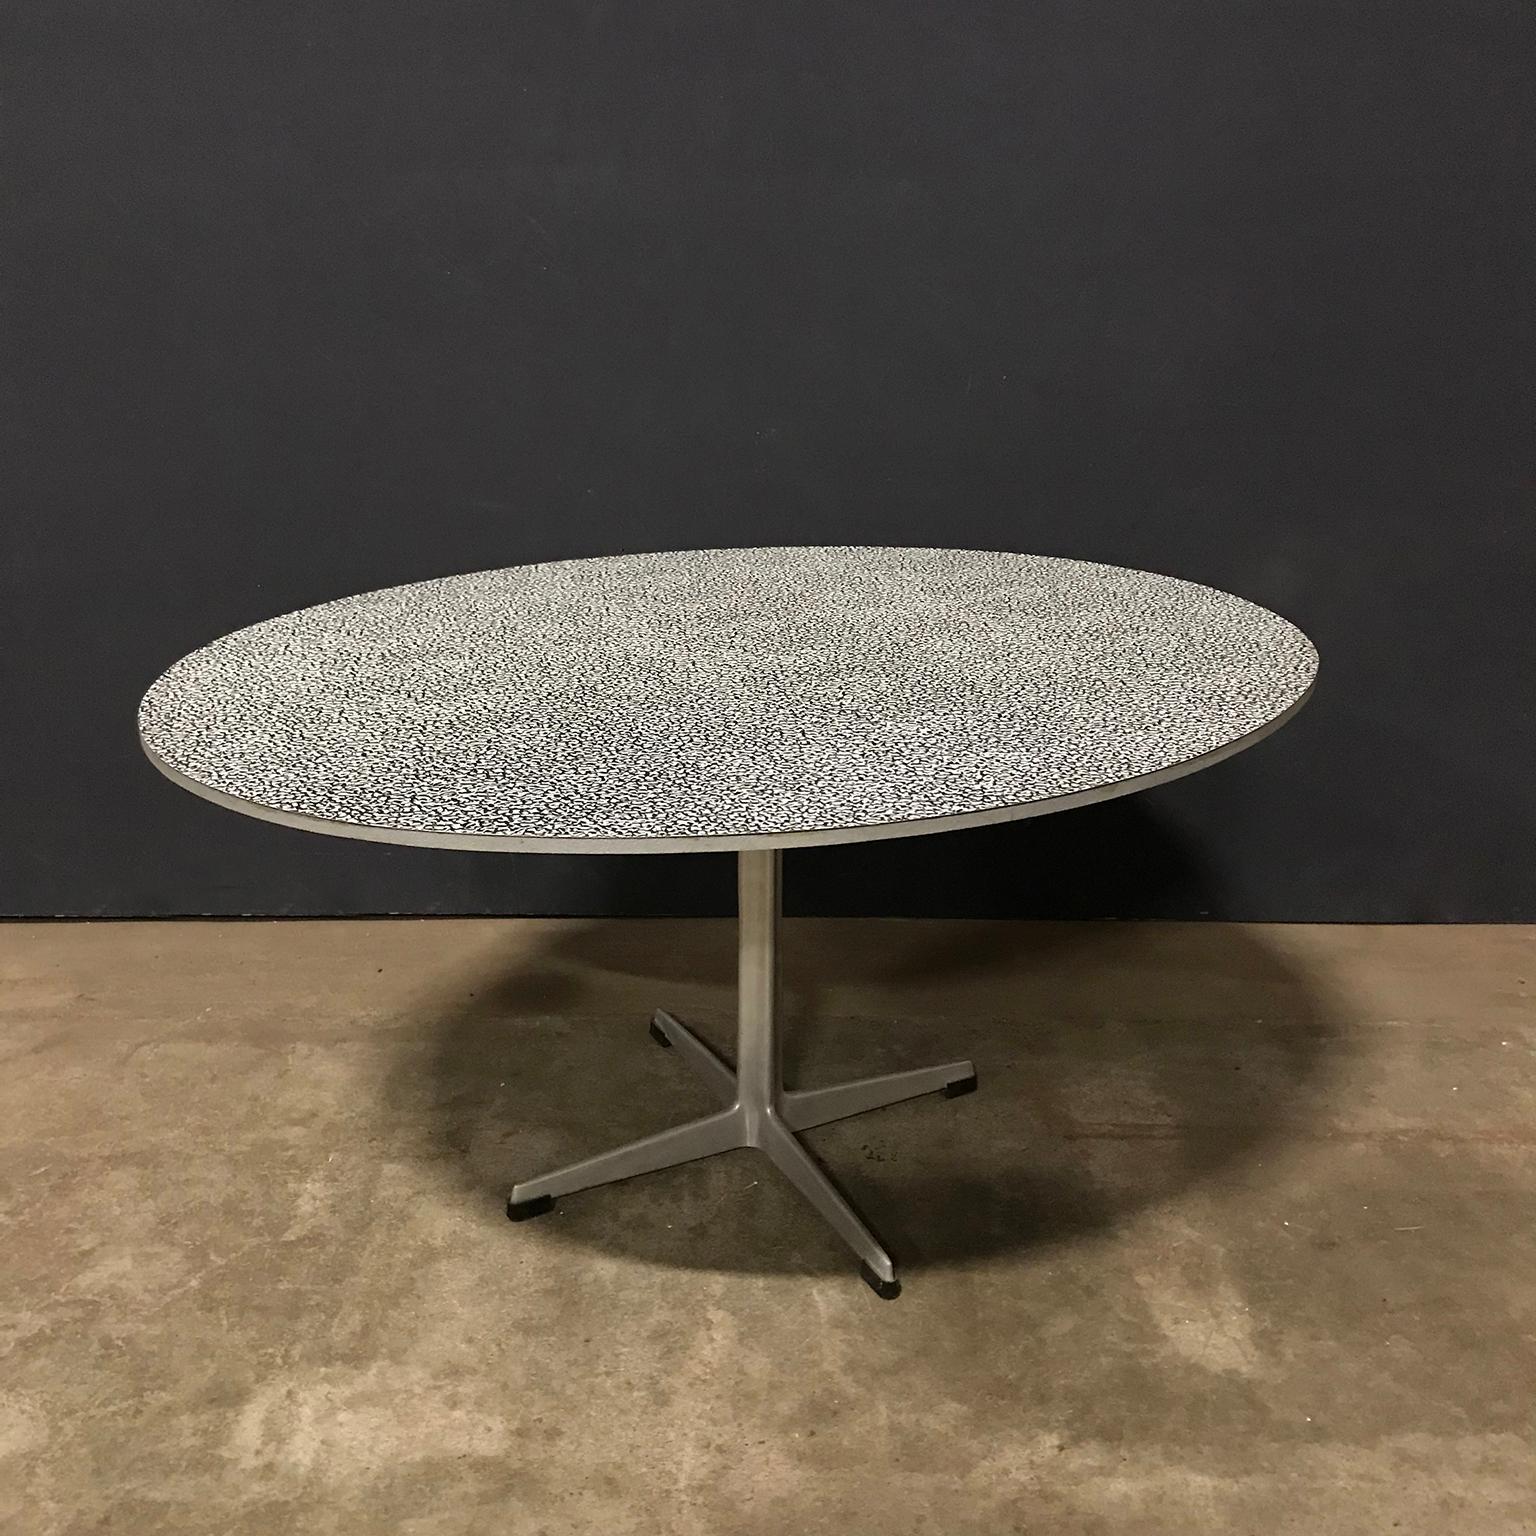 Rare formica coffee table by Fritz Hansen.
Beautiful elegant design is beautiful with it's oval table top in formica.
The table top is beautiful, but is missing 2 minor chips at the edge (pictures #7 and #8), which are not that obvious because of